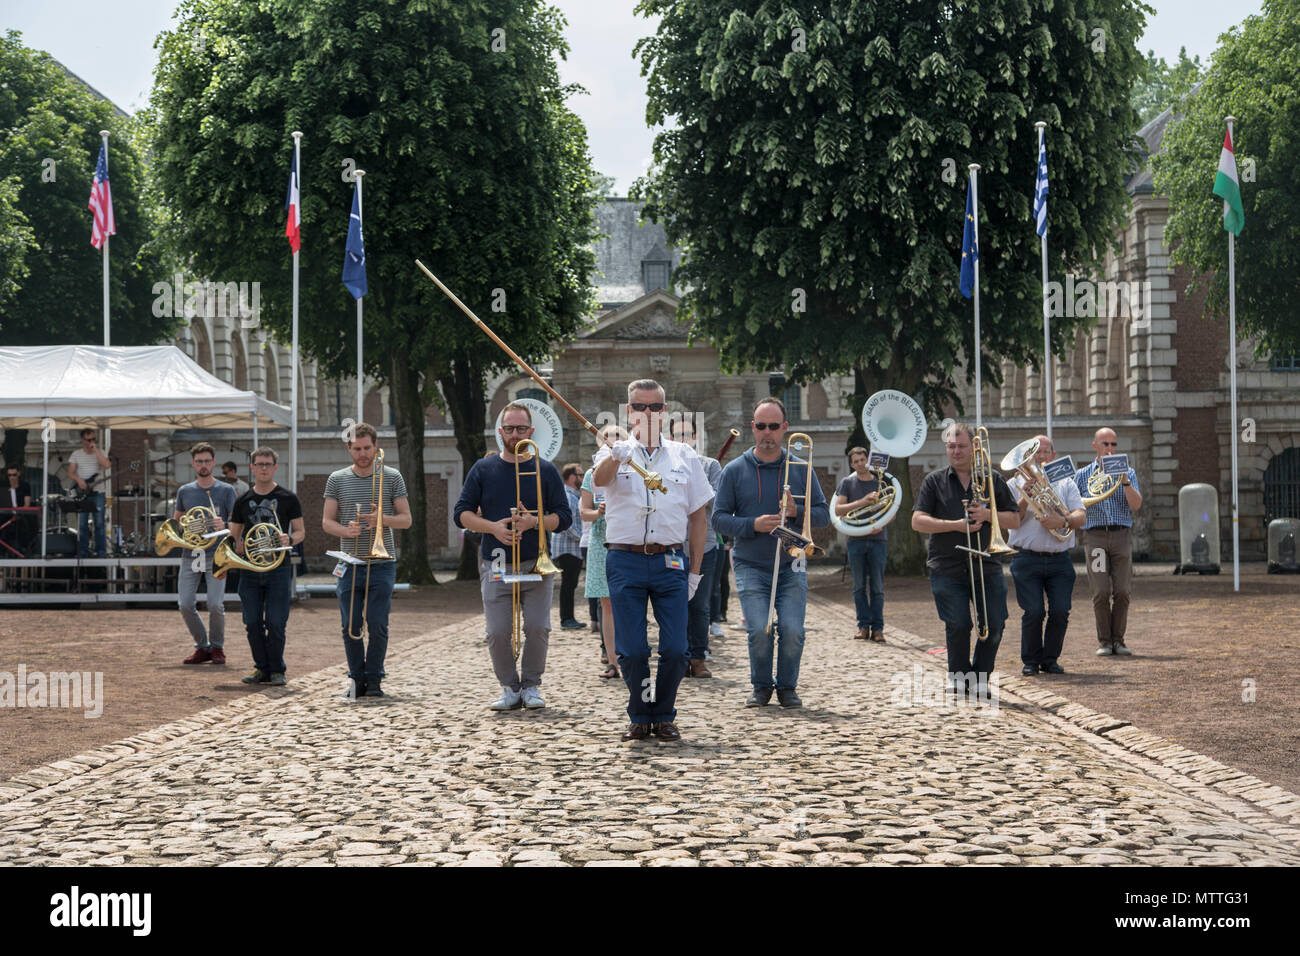 The Belgian Navy Band rehearses for their performance of the Citadelle 350 anniversary, May 25, 2018, Lille, France.  US Army photo by SGT Joseph Agacinski/released. Stock Photo